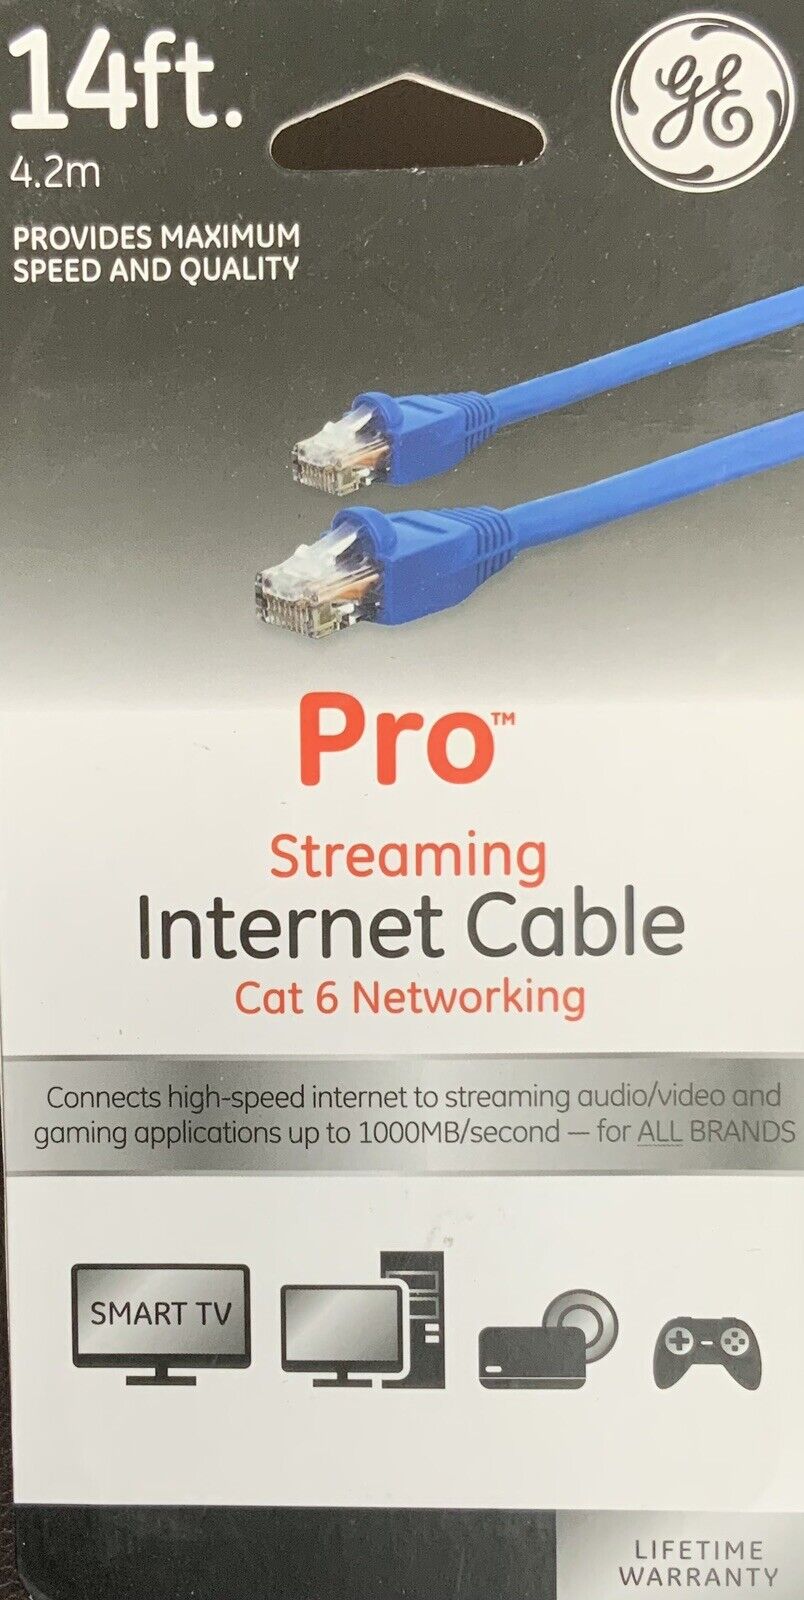 GE Pro Cat 6 Streaming Internet Cable - 14 Foot - Blue